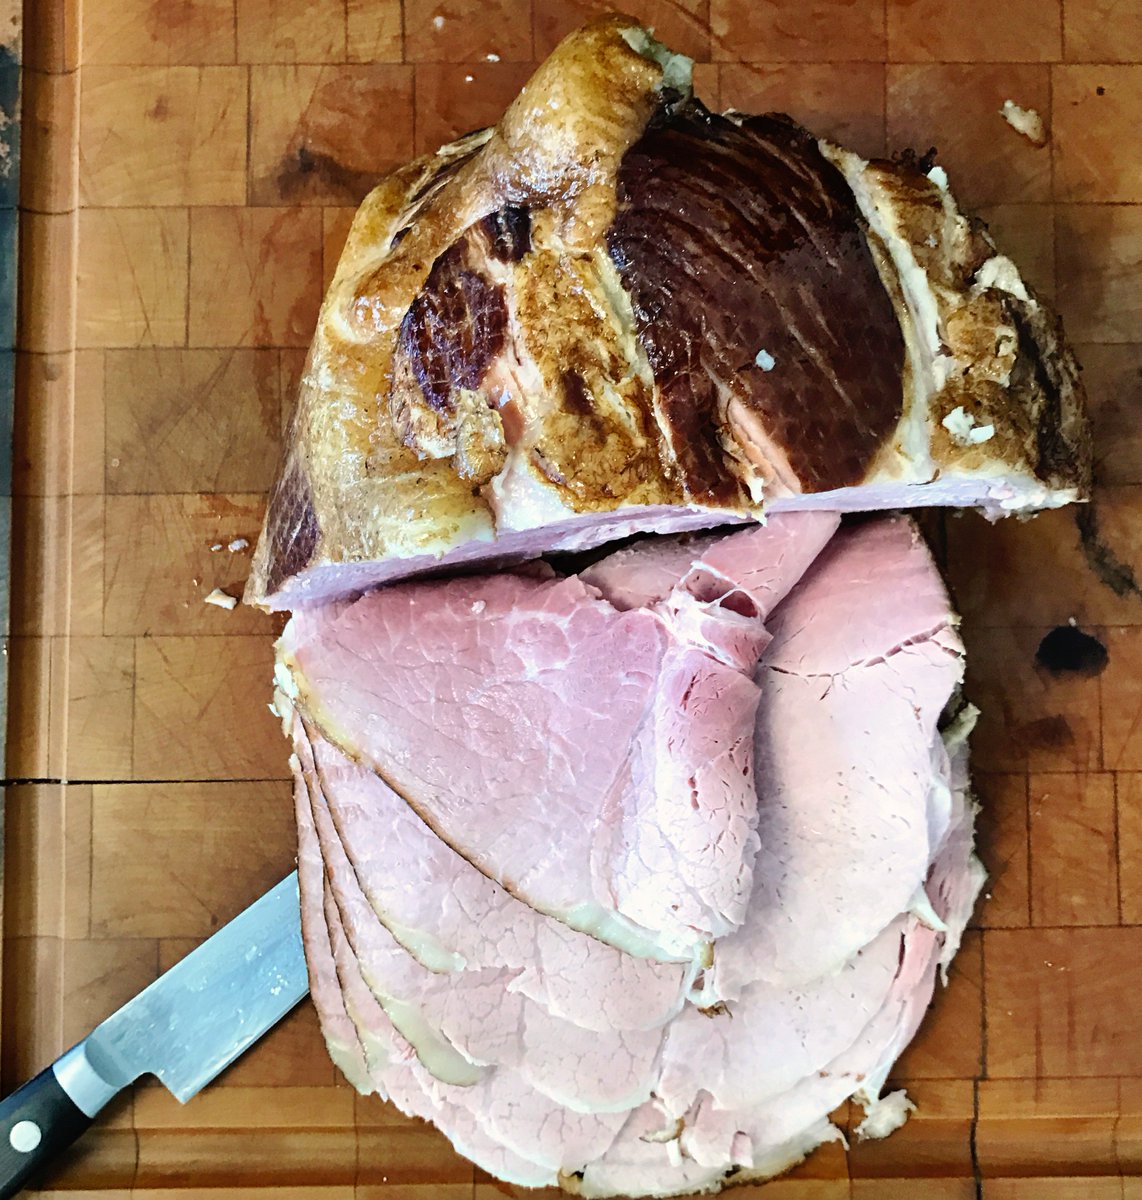 Our Freezing February #sale is happening NOW! Save big on select items including our #smoked bone-in #maplecured #heritagebreed #ham.  Valid online only thru 2/19. Time to make room in your fridge and stock up! #februarysale #stockup